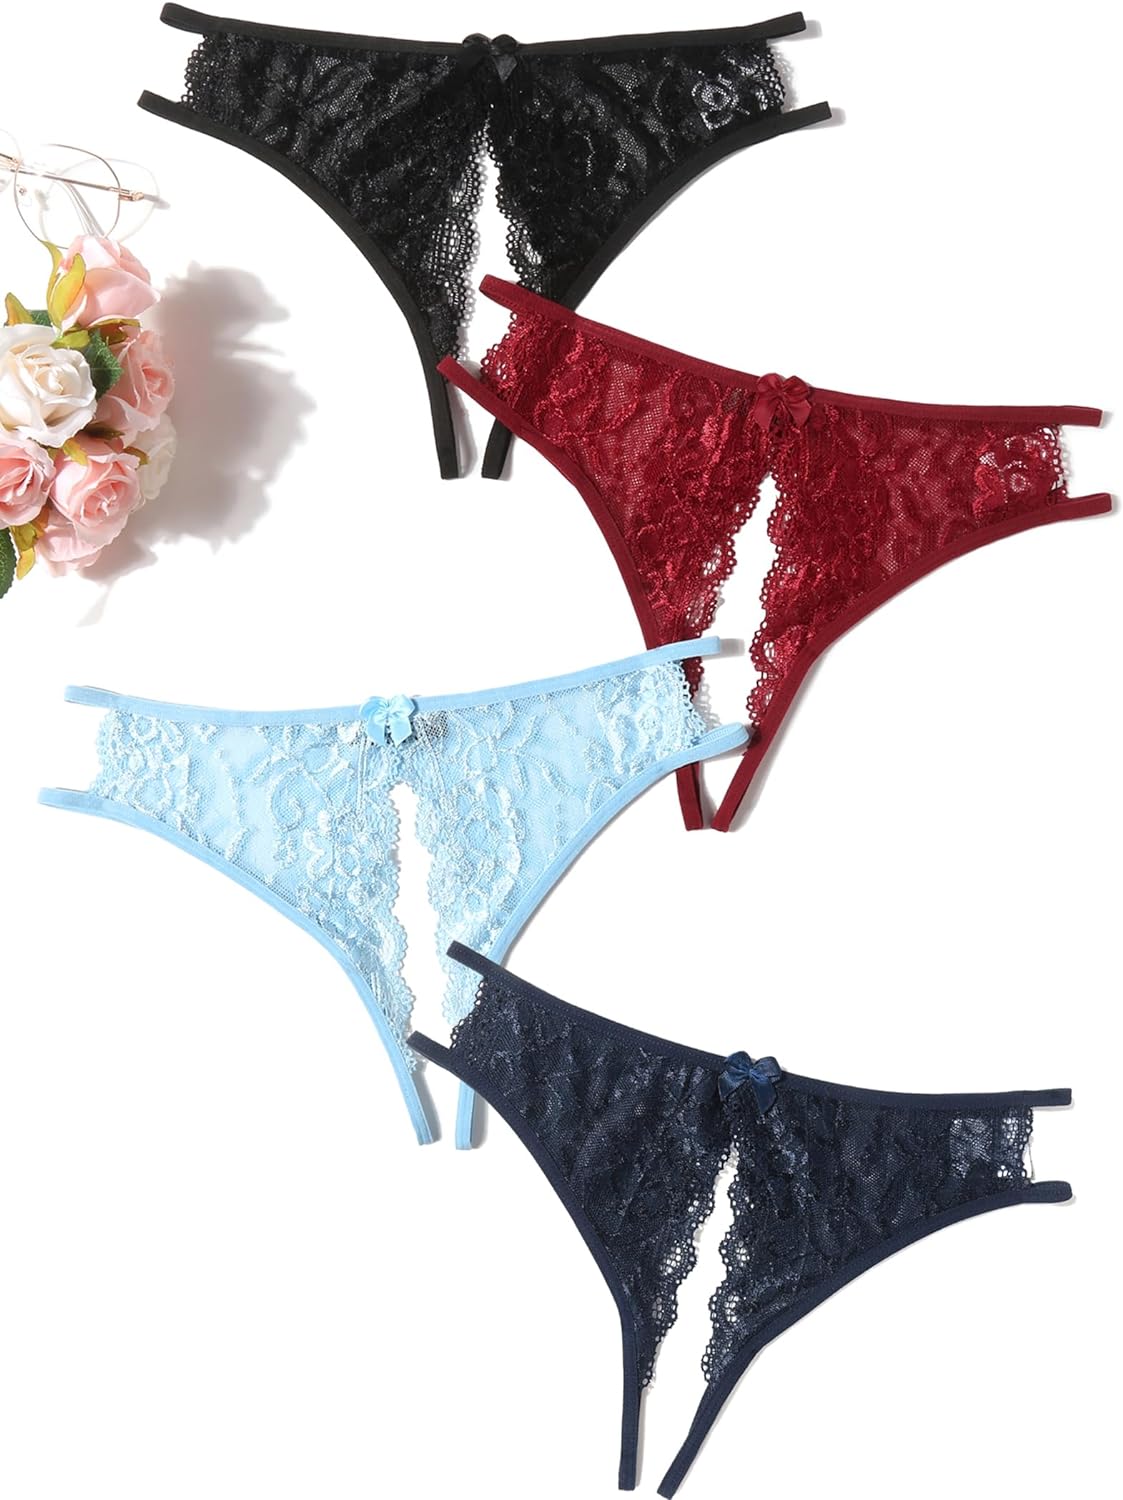 Avidlove Lace Panties Underwear Floral Lace Briefs with Cute Bow Center